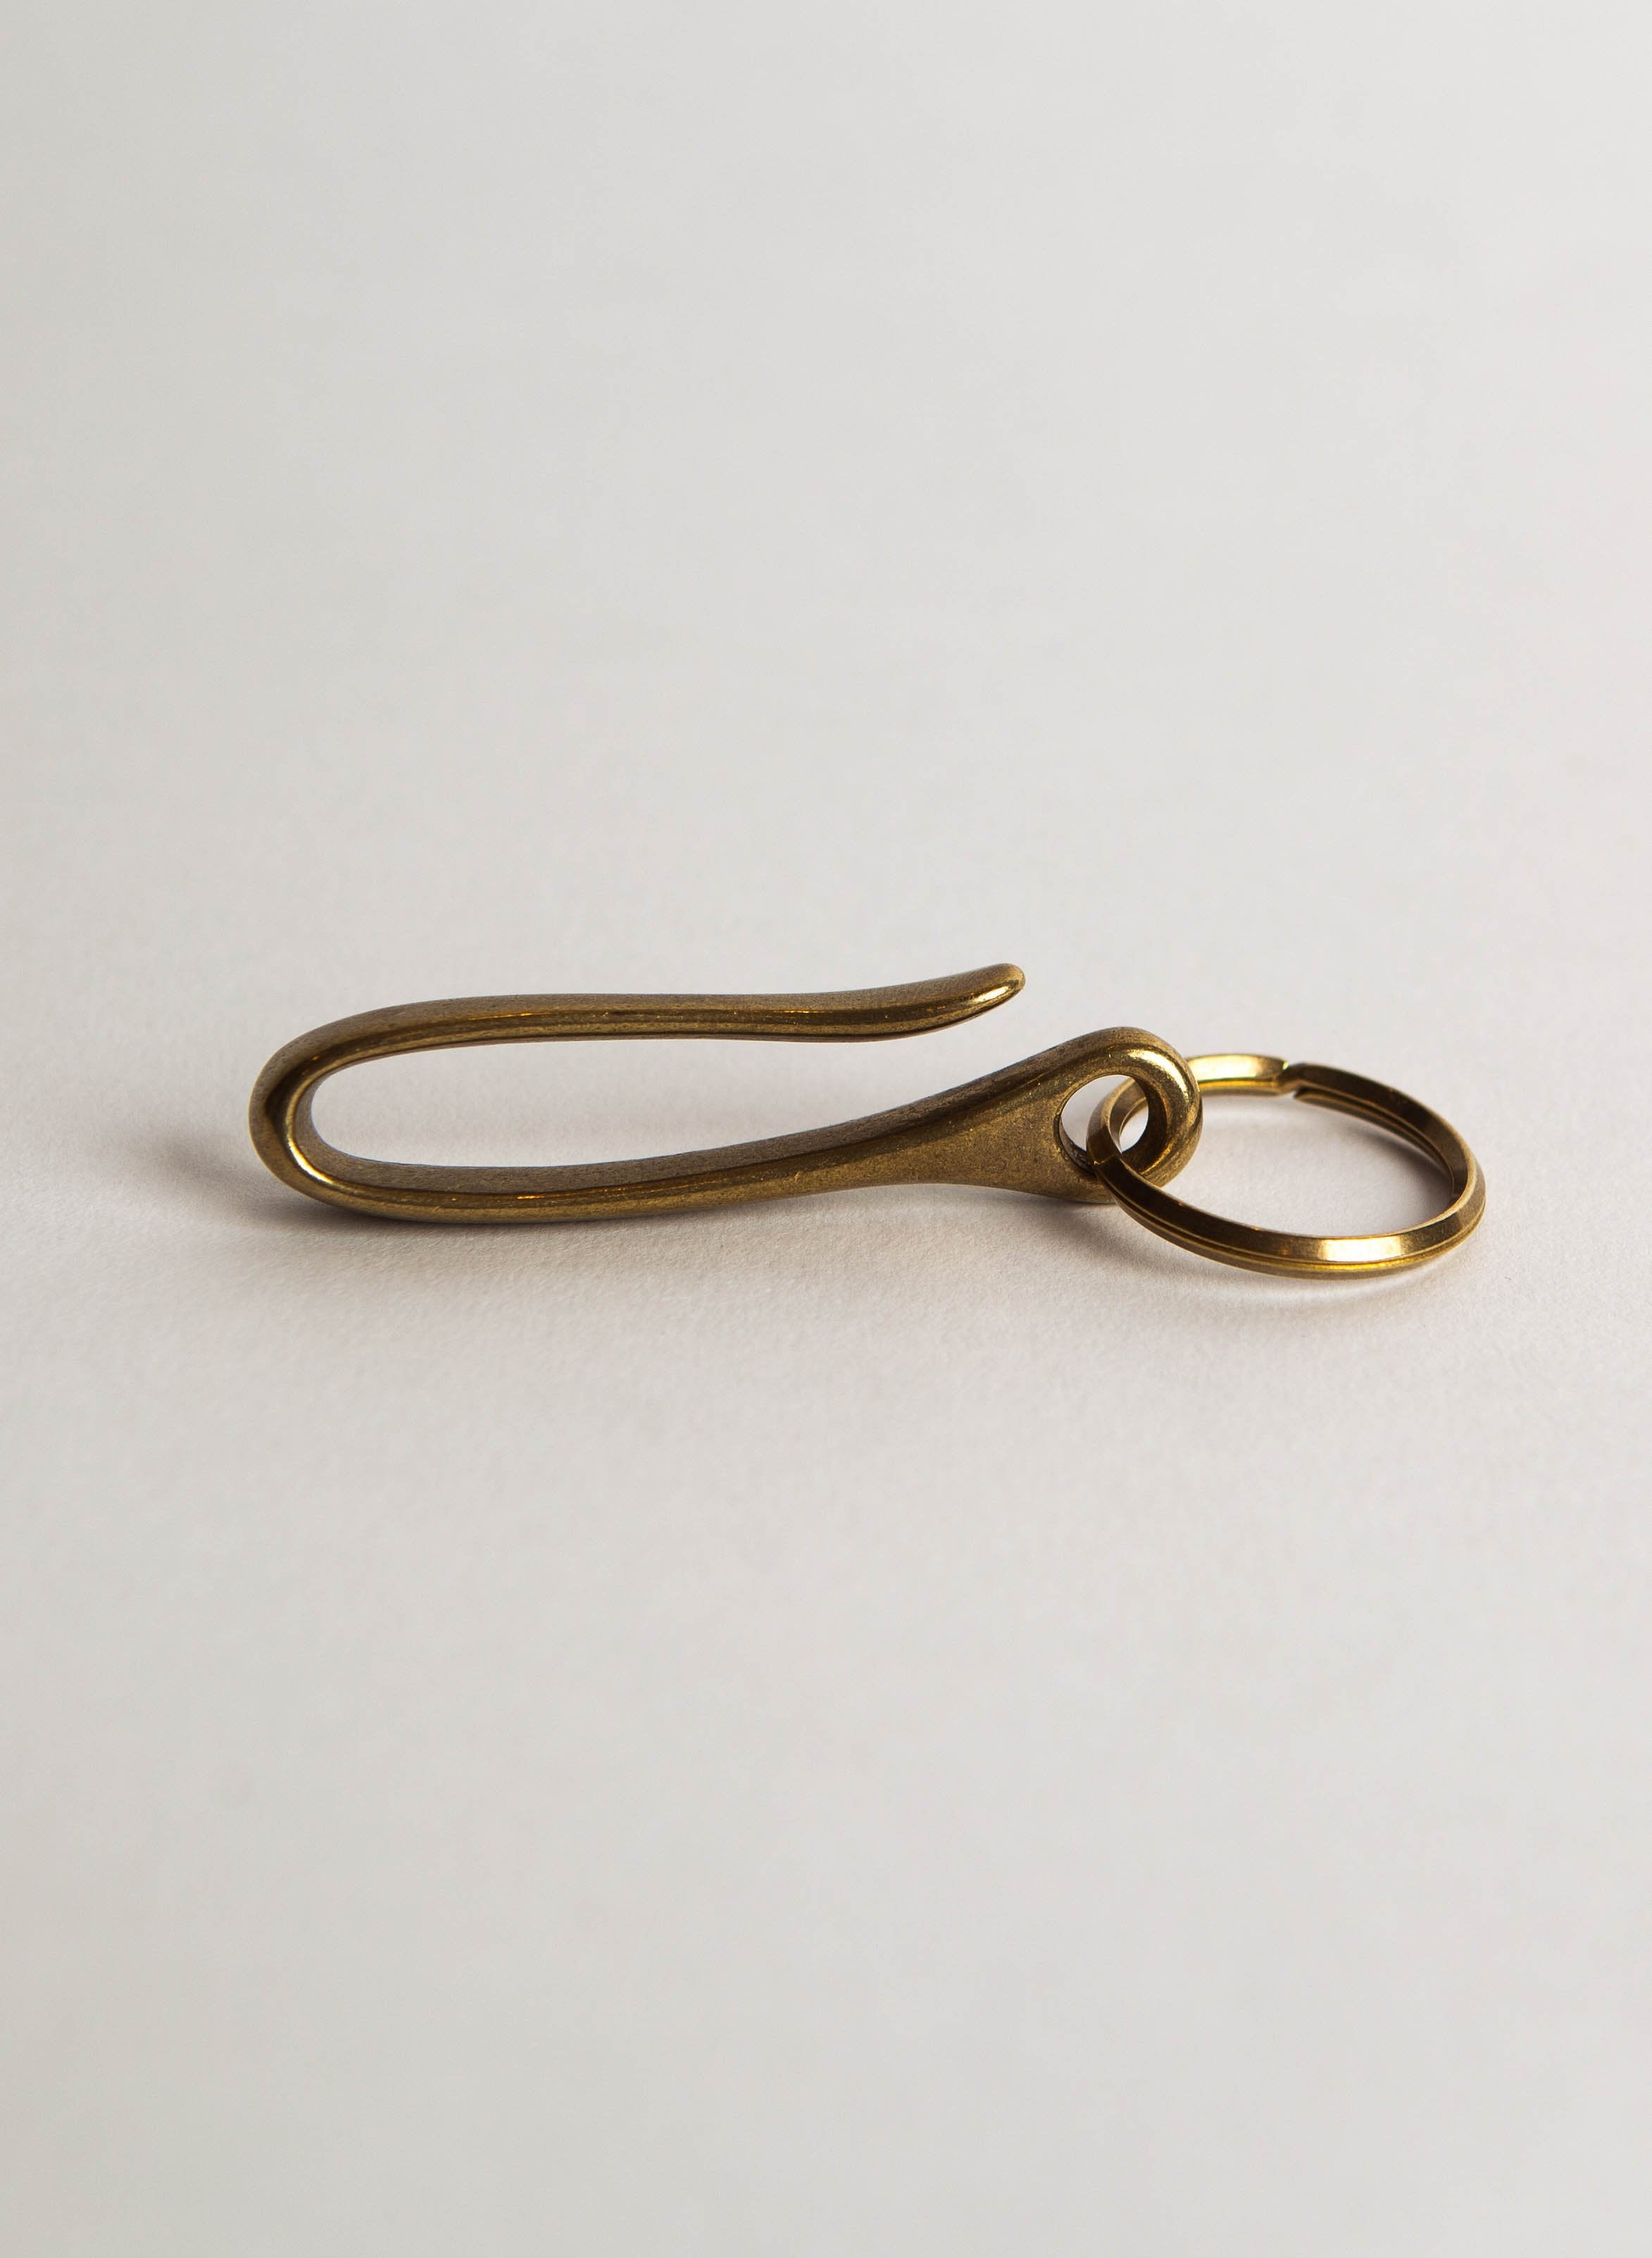 Brass Japanese Hook With U Shackle Clasp Fish Hook Key Chain Clasp